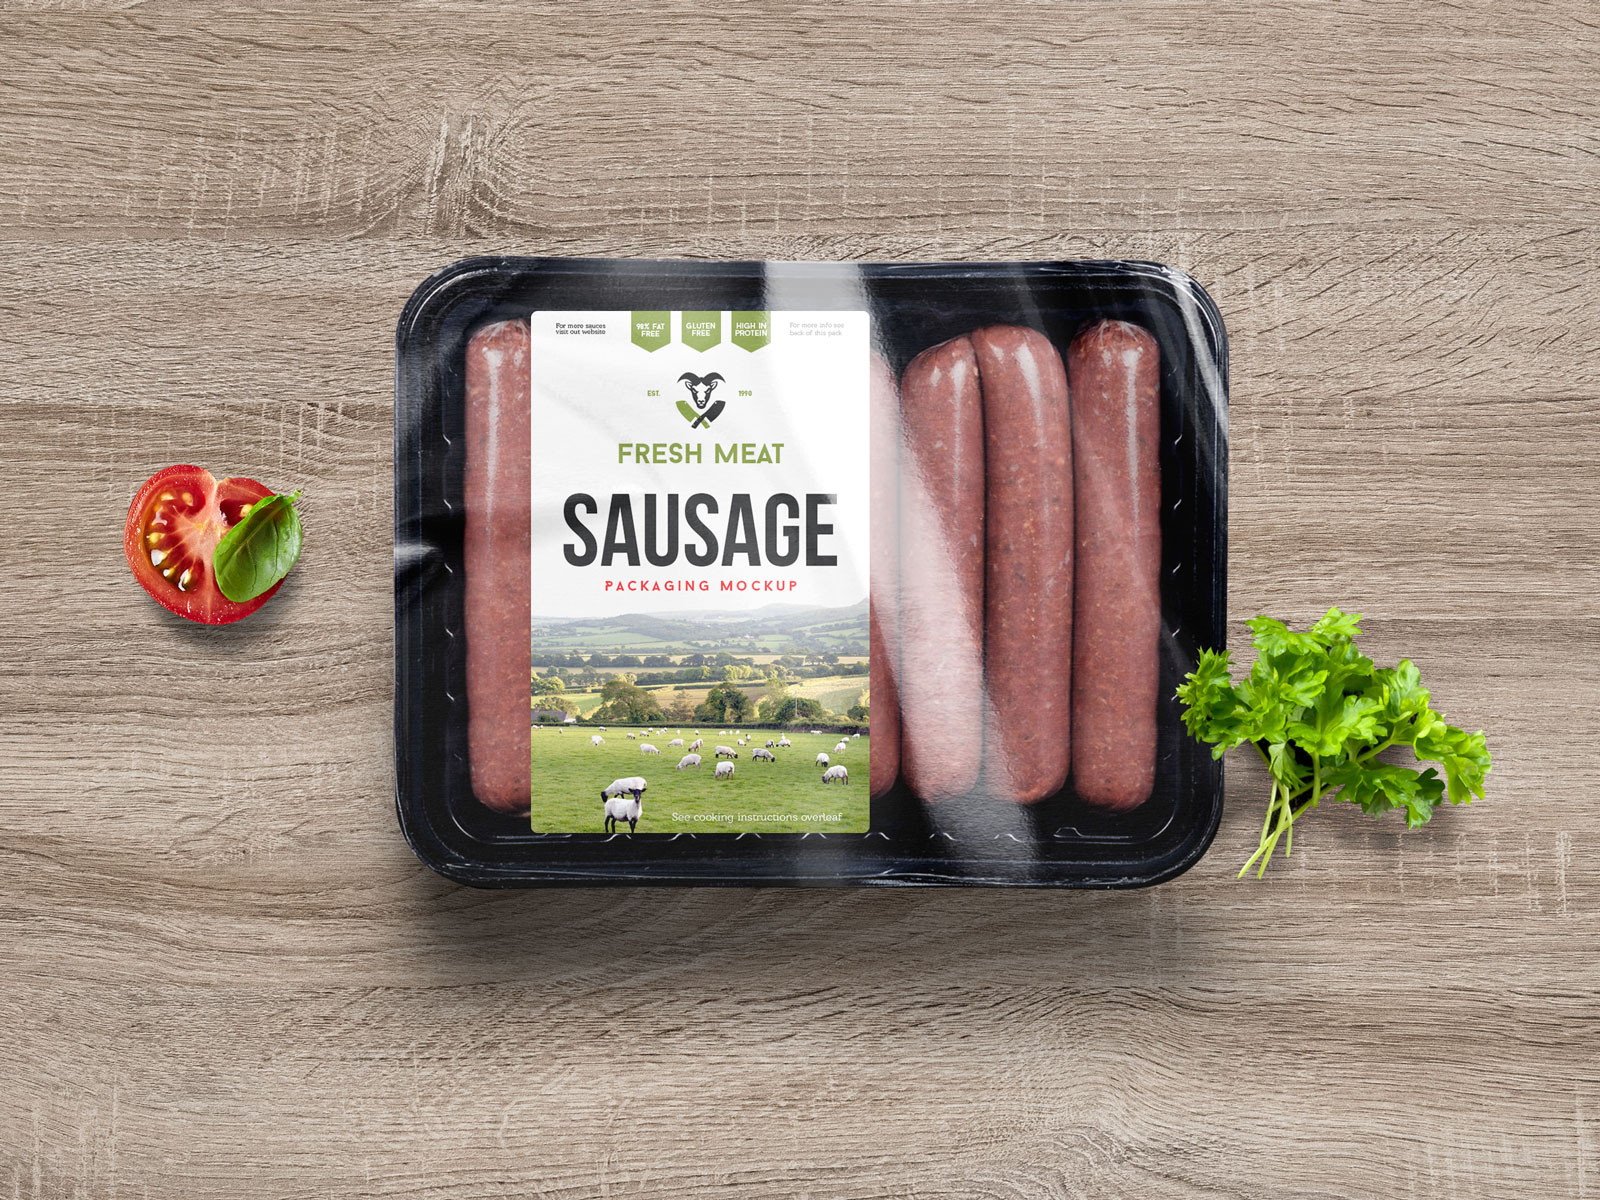 Download Free Sausage Food Packaging Mockup PSD by Zee Que ...